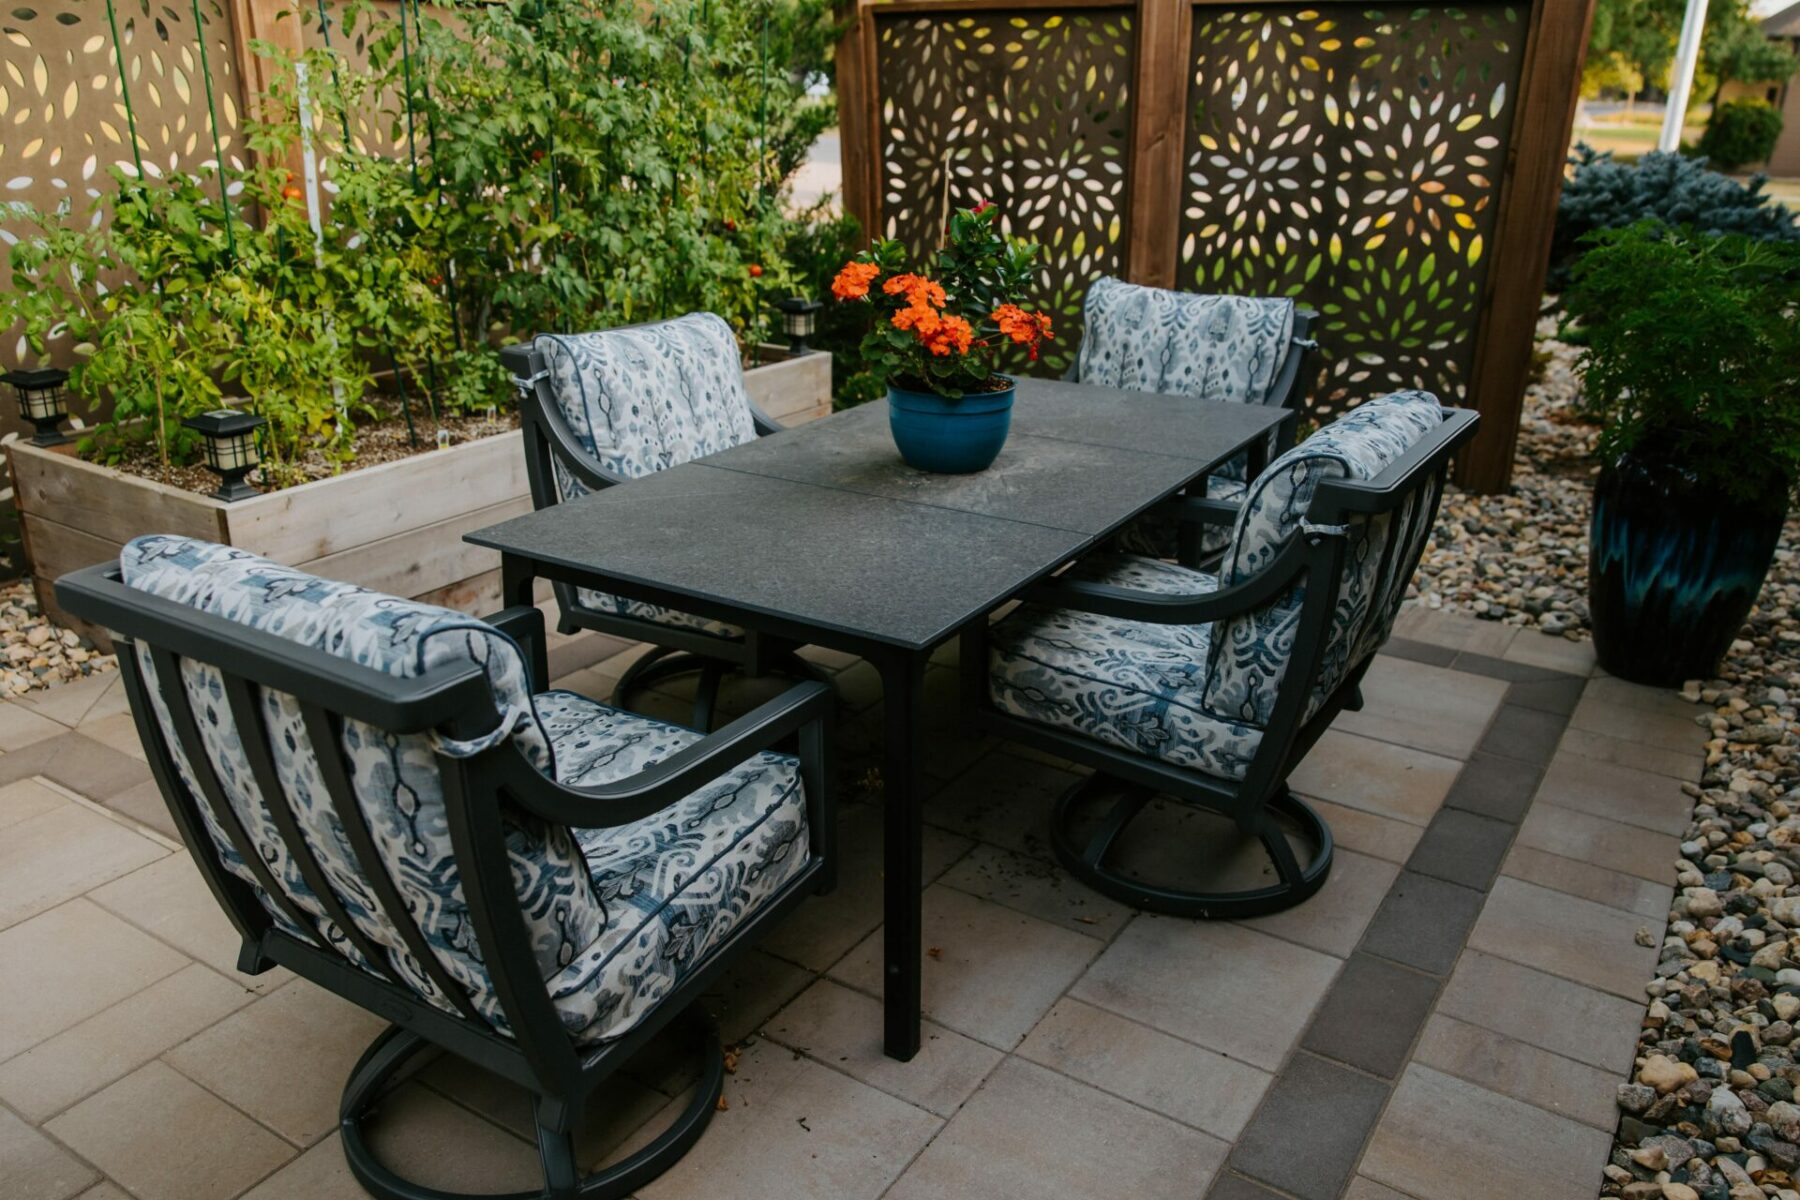 Outdoor Patio with Dining Table for Hosting